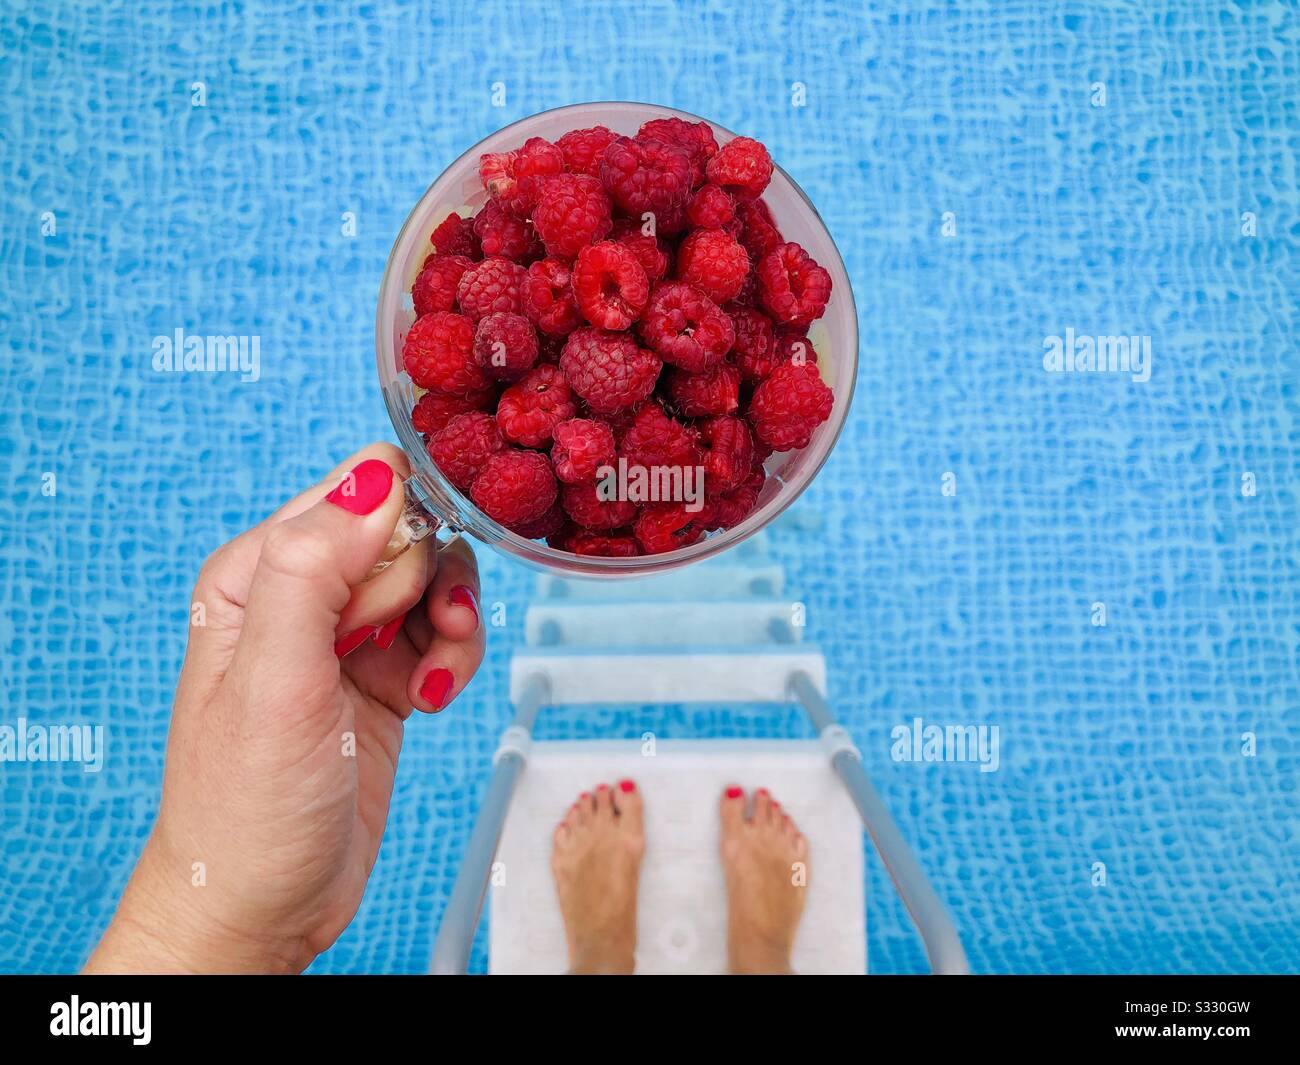 Healthy snack by the pool Stock Photo